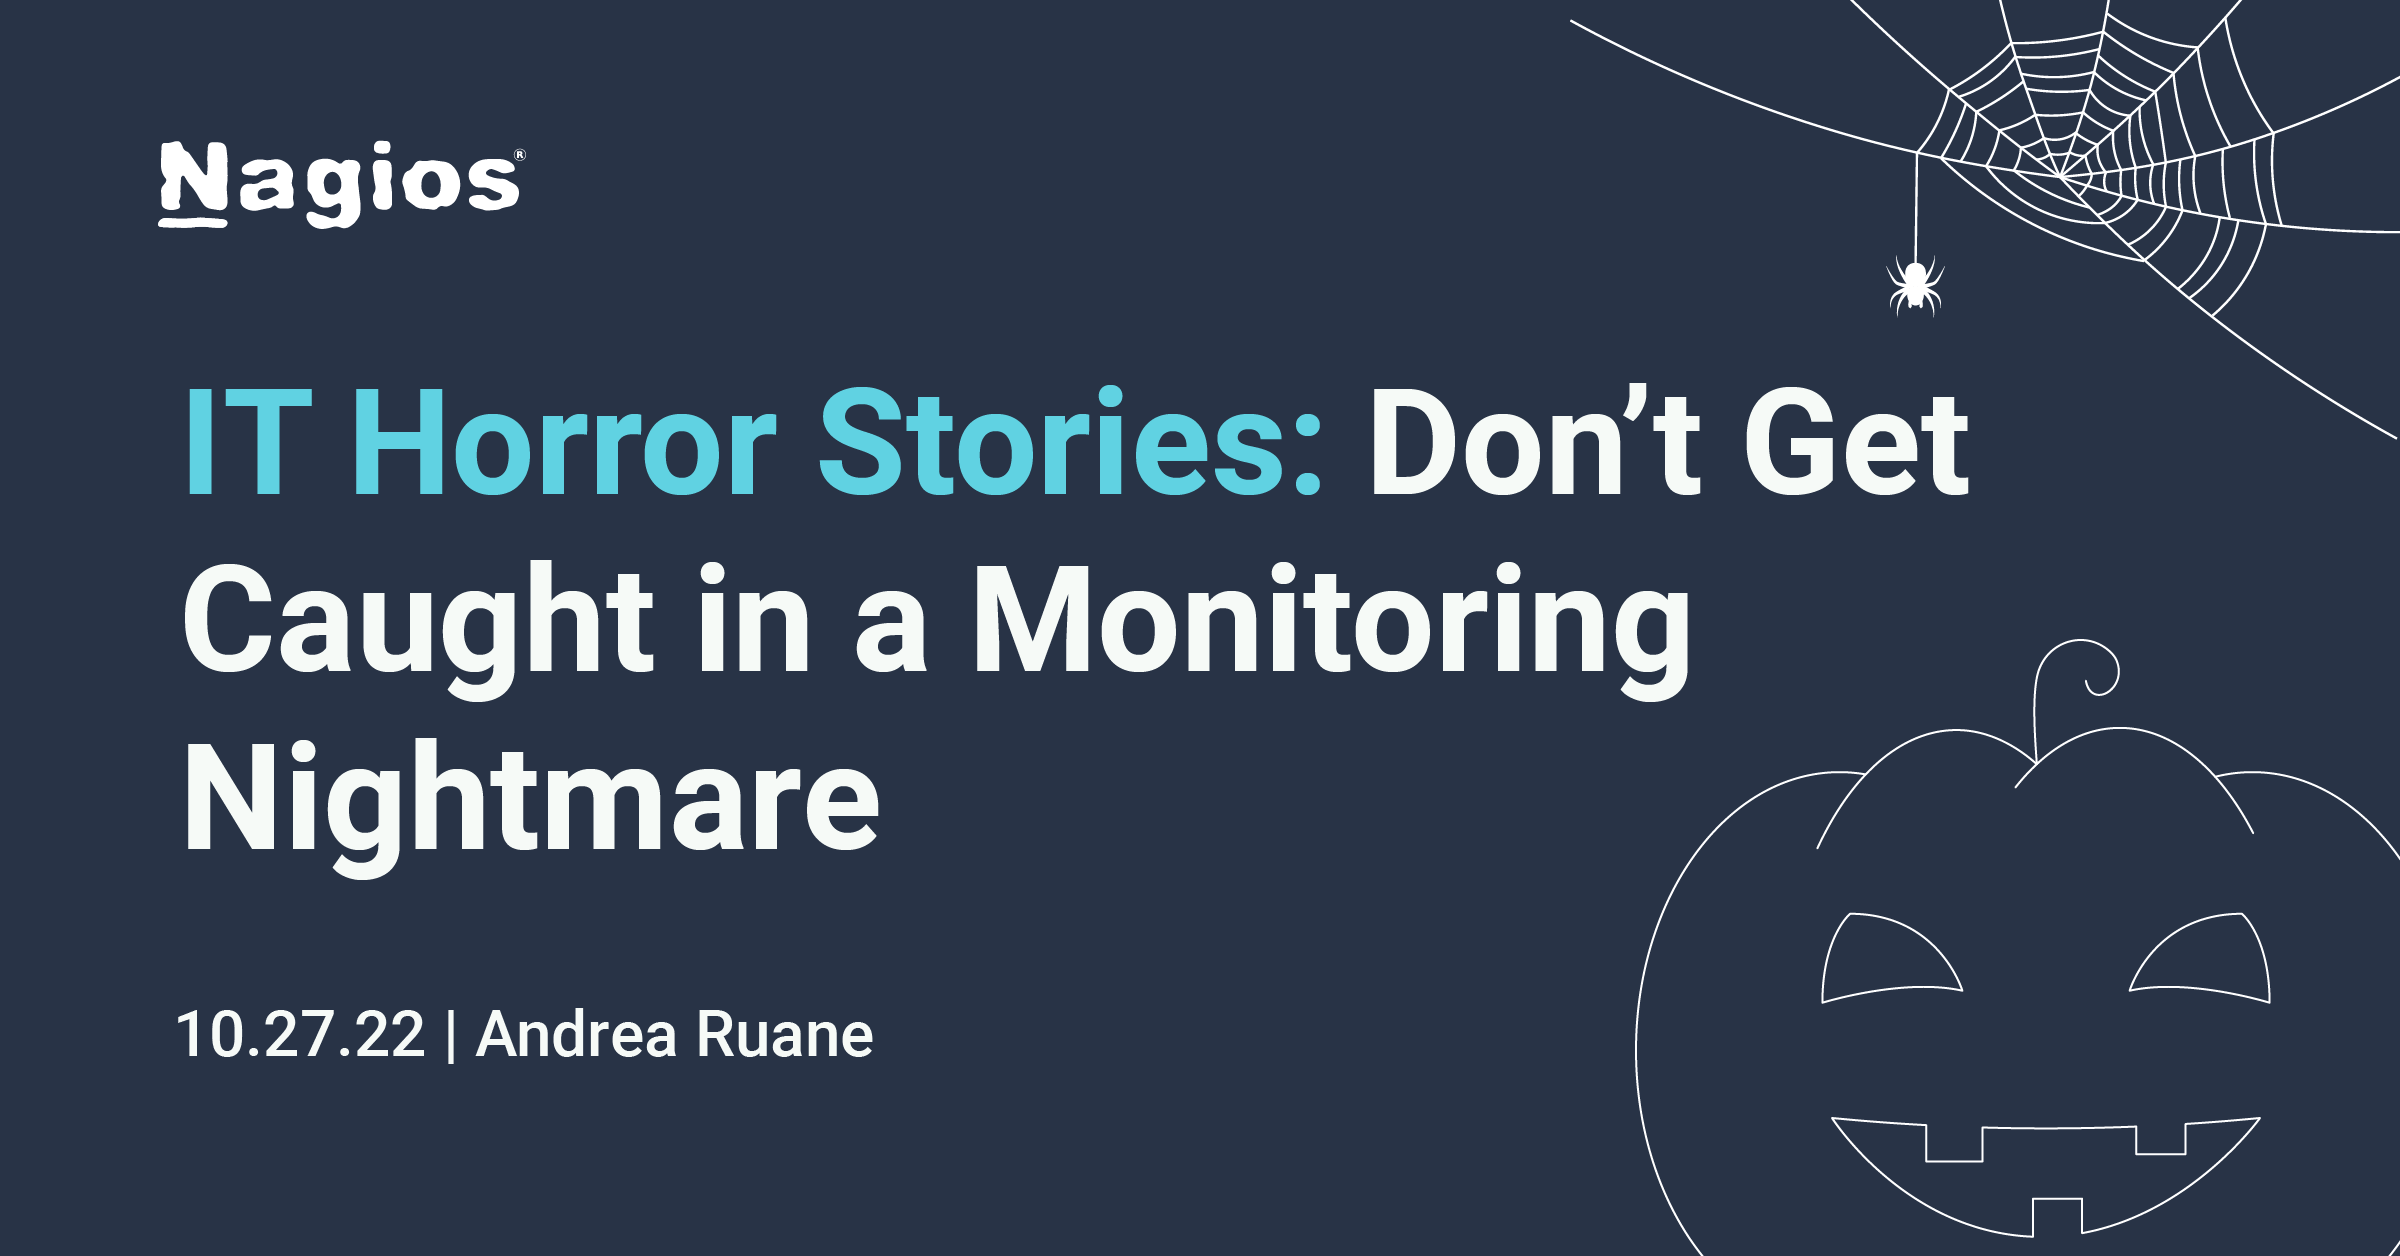 nagios webinars: it horror stories don't get caught in a monitoring nightmare